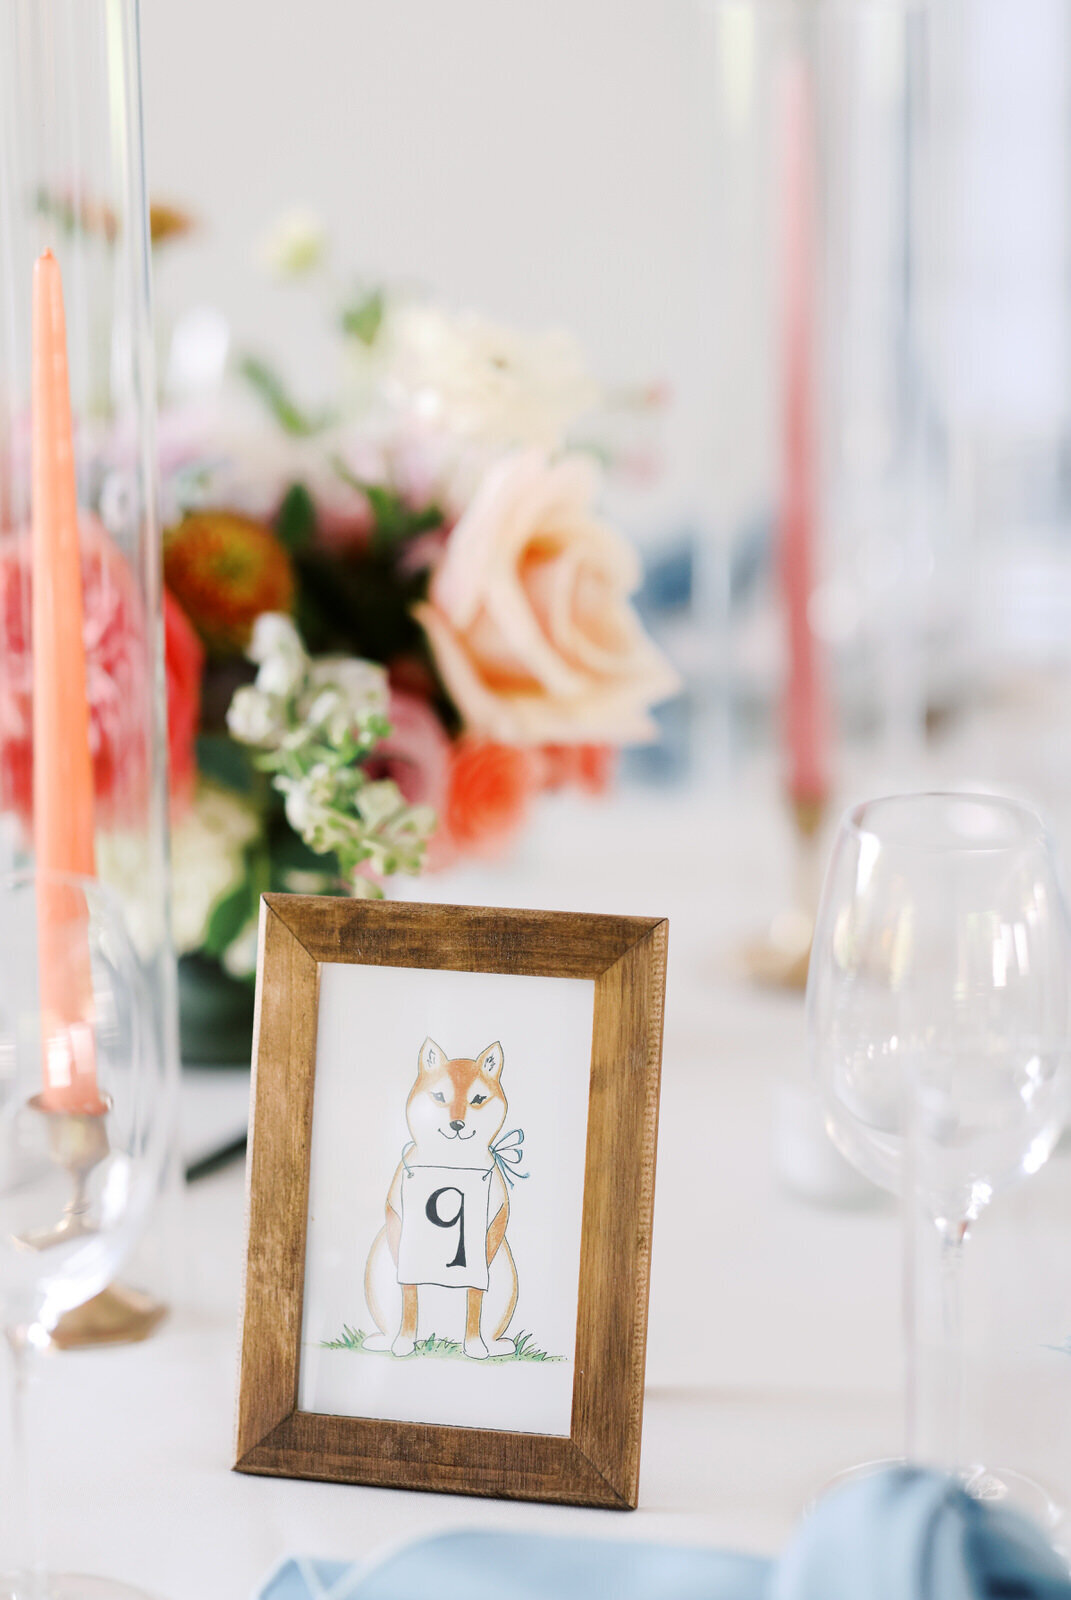 A stylish bride adds creative details to her Strong Mansion wedding in Dickerson, Maryland.